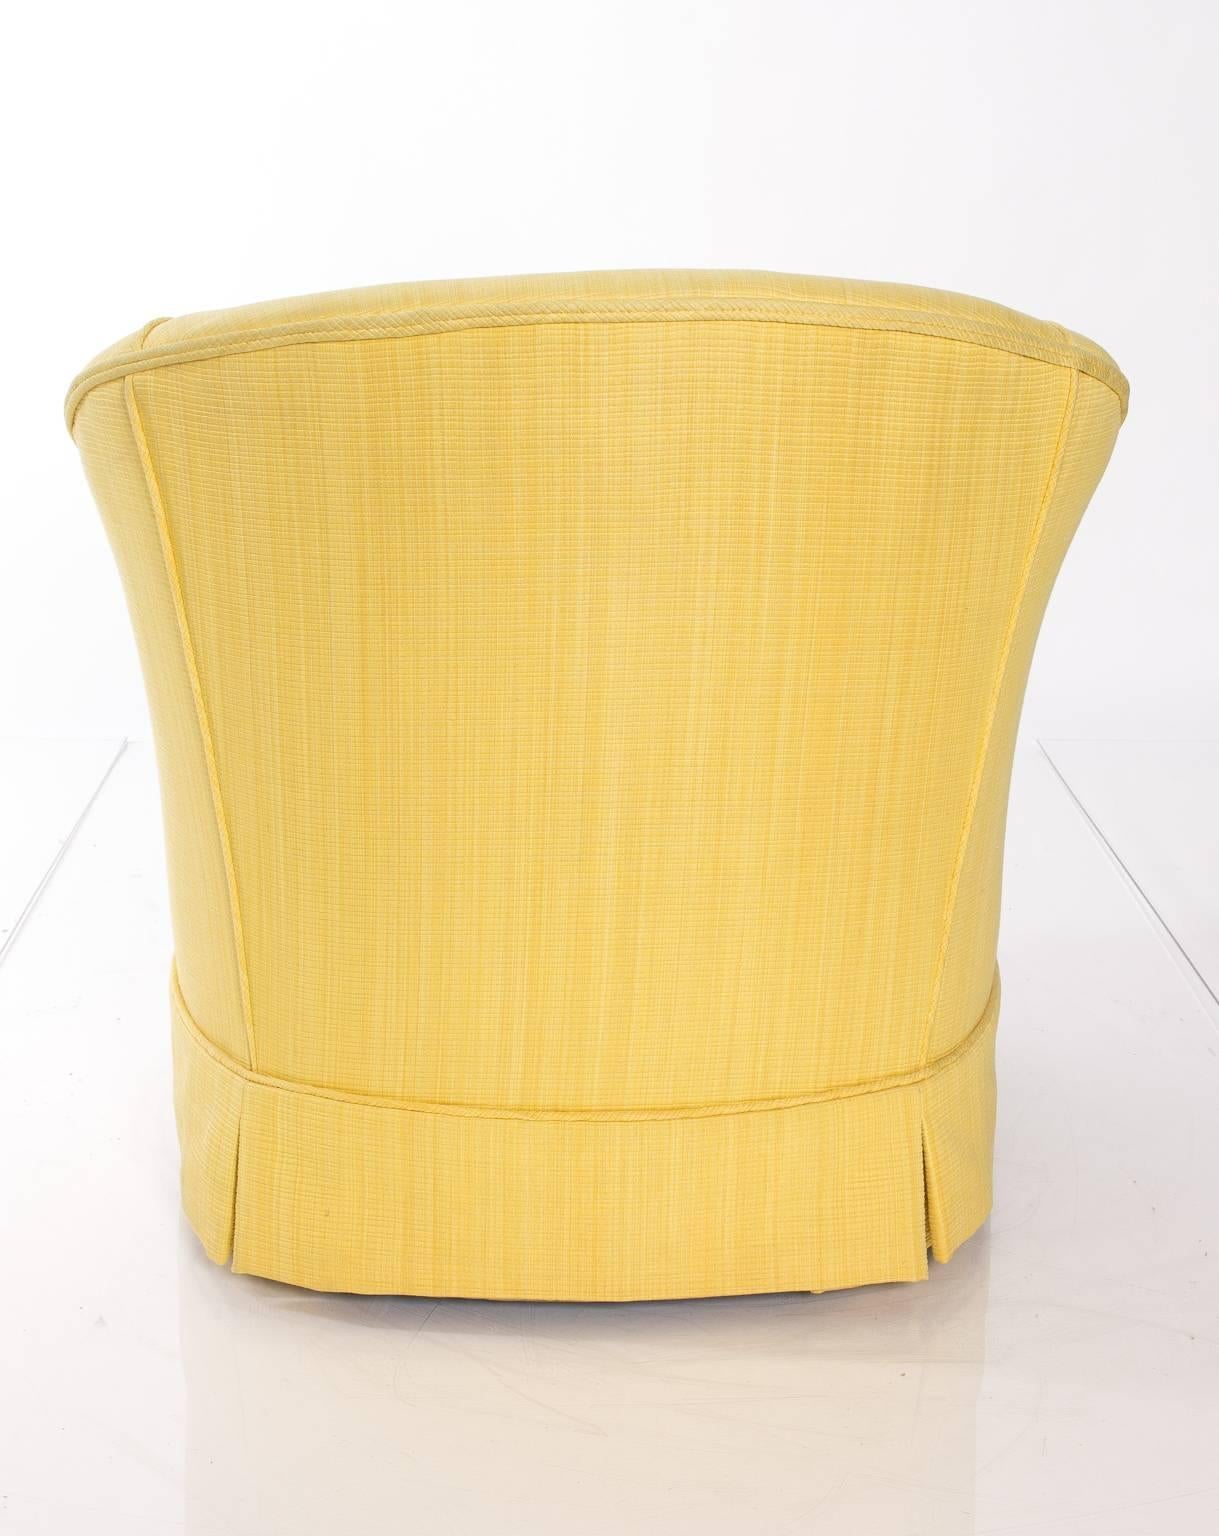 Pair of slipper chairs upholstered in a light yellow fabric.